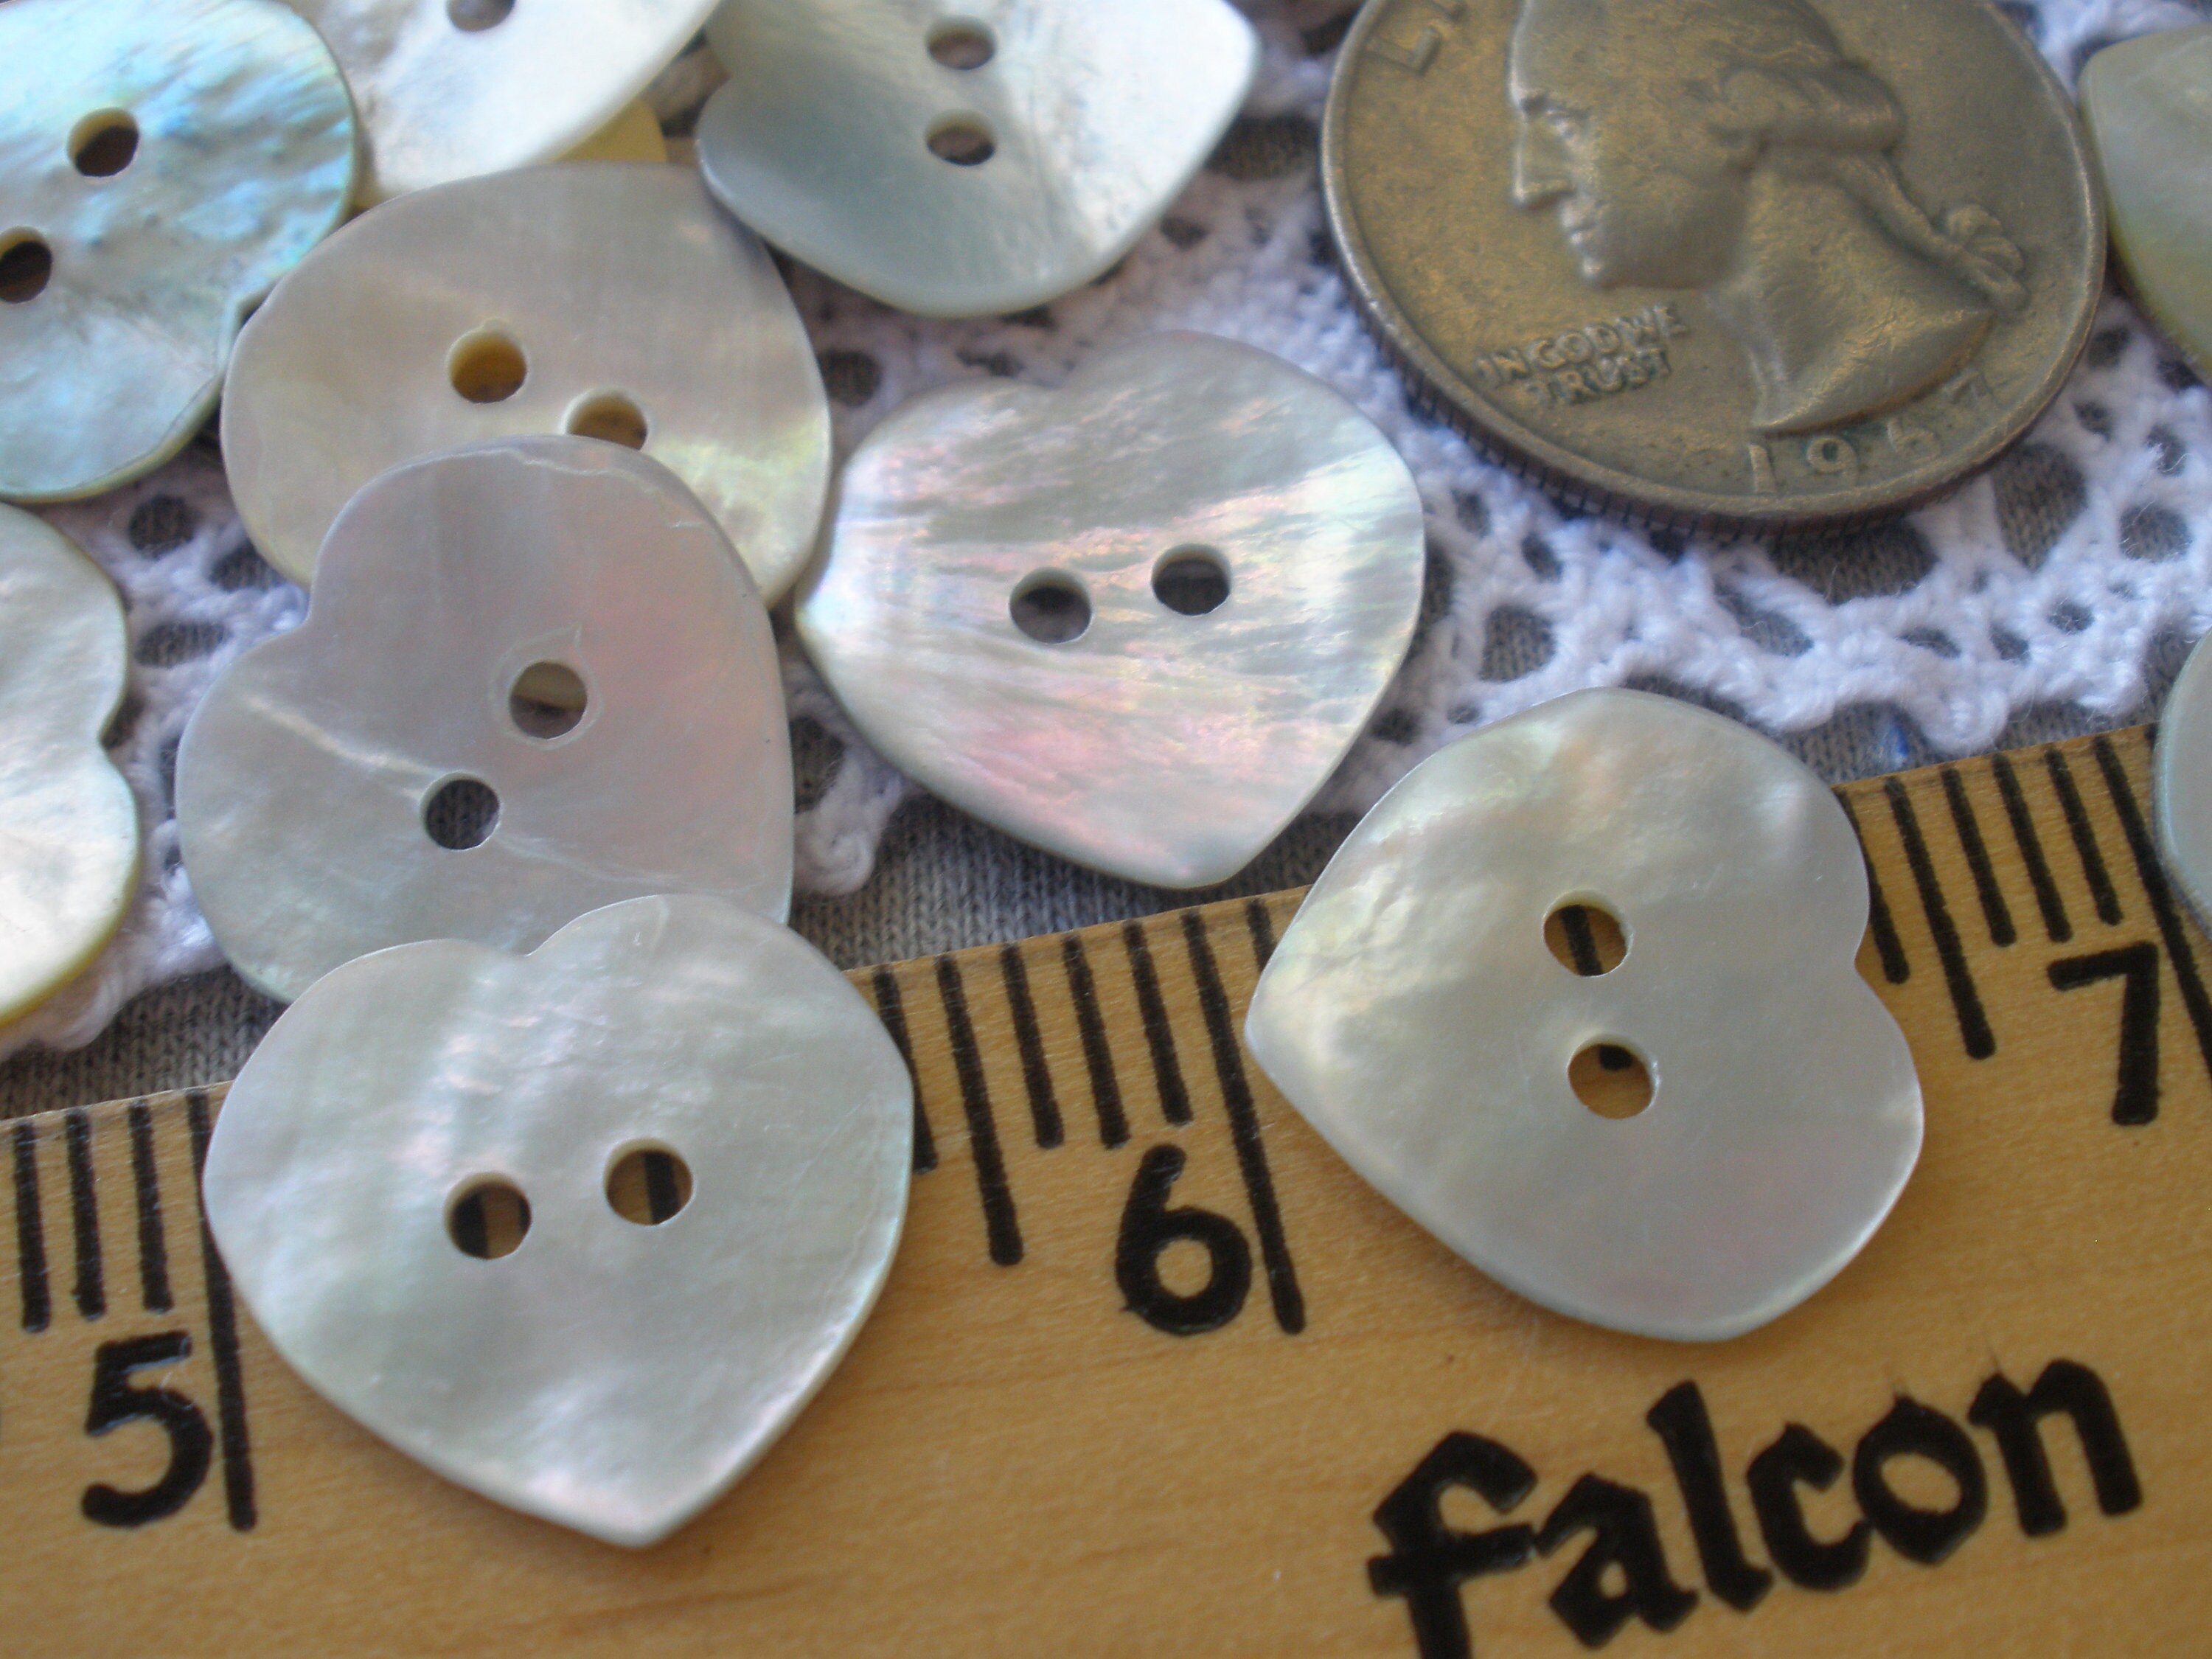 Star Shaped Shell Buttons 13 mm - natural - Sew Vintagely